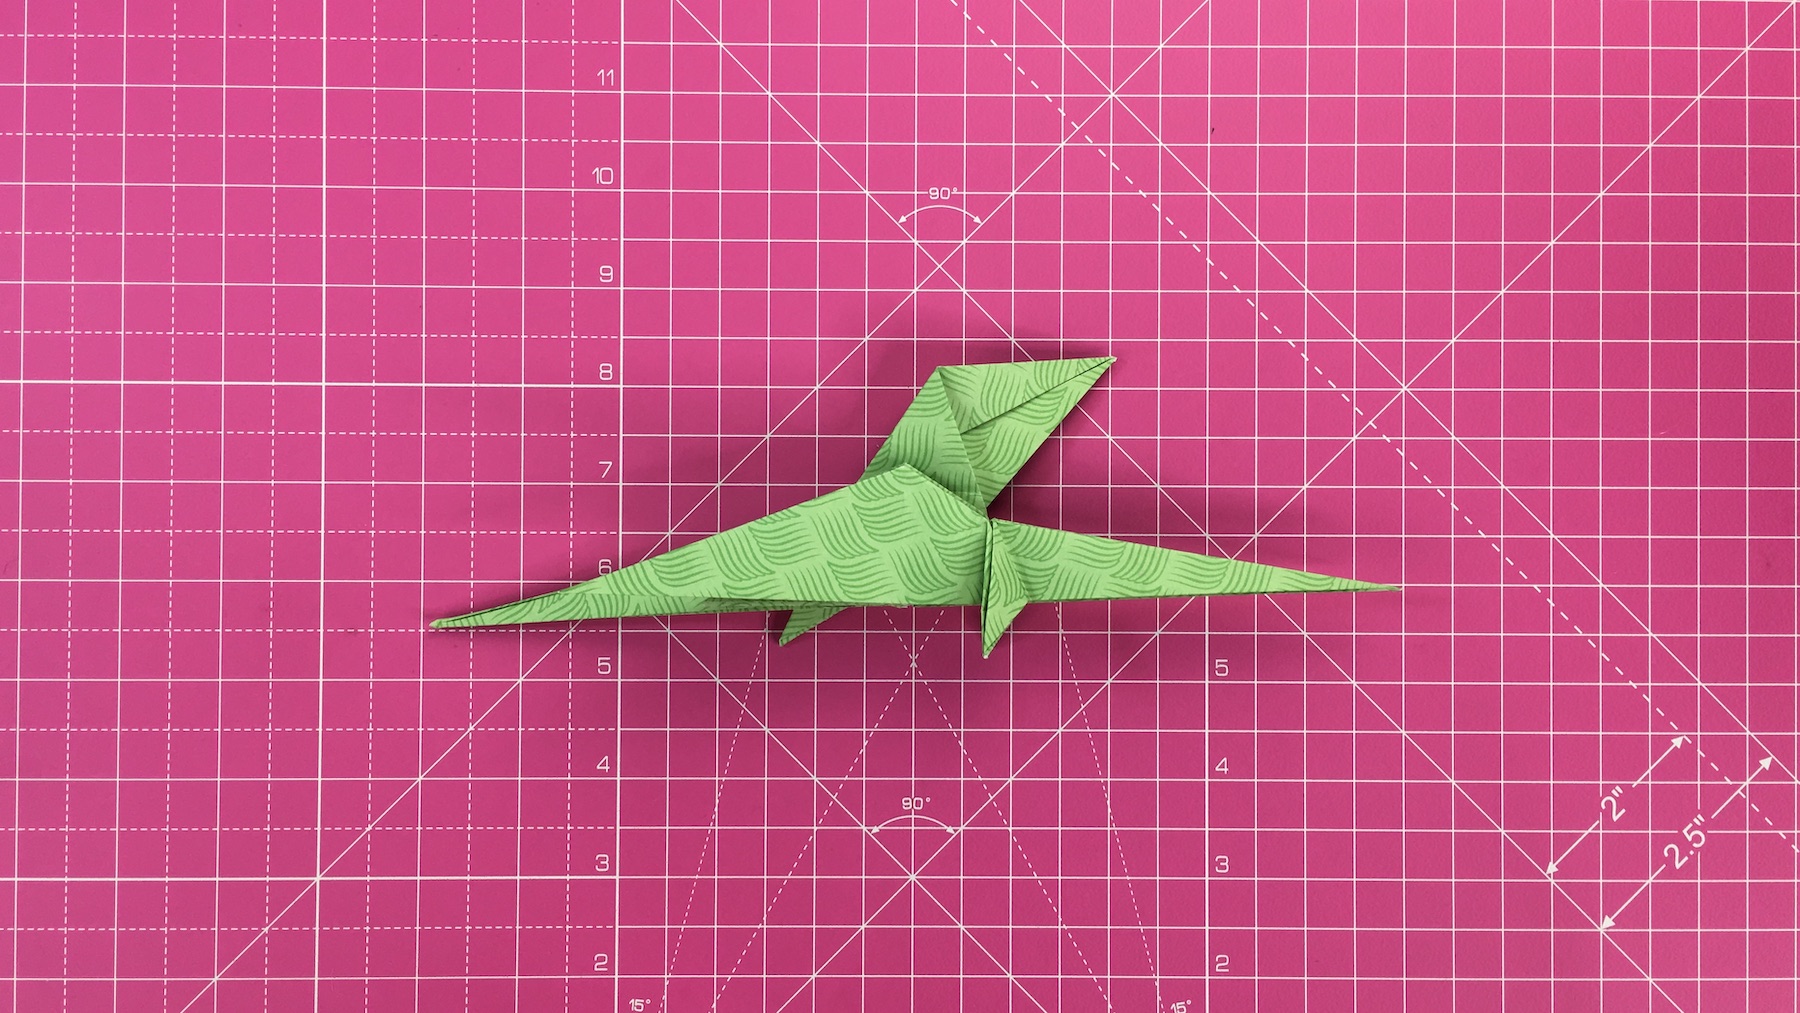 How to make an origami dragon, origami dragon tutorial - step 40